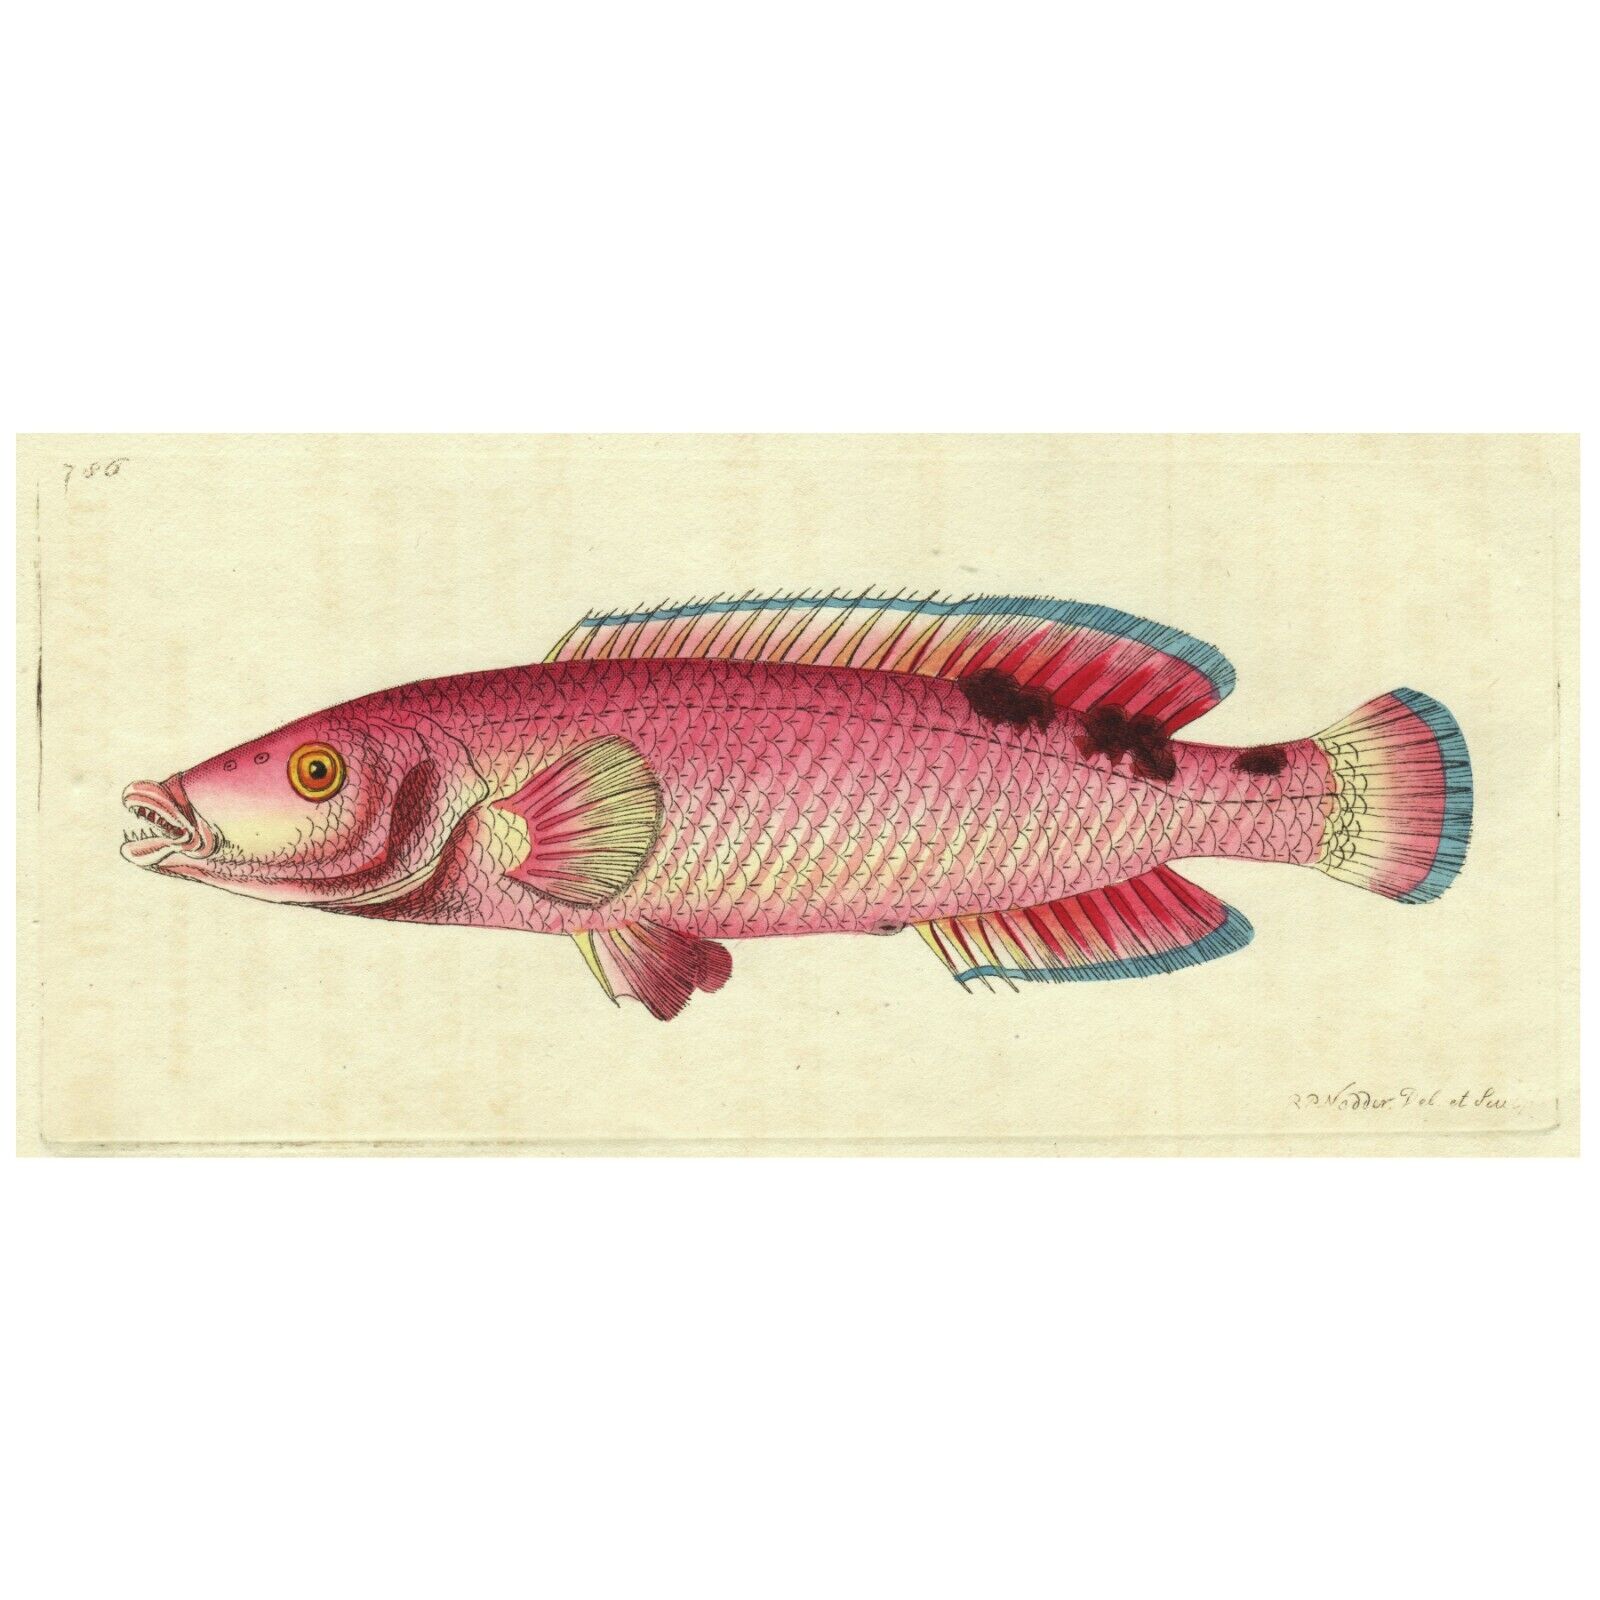 Rare 1806 Shaw & Nodder Hand-Colored Fish Engraving #538 CUKOO WRASSE, LABRUS